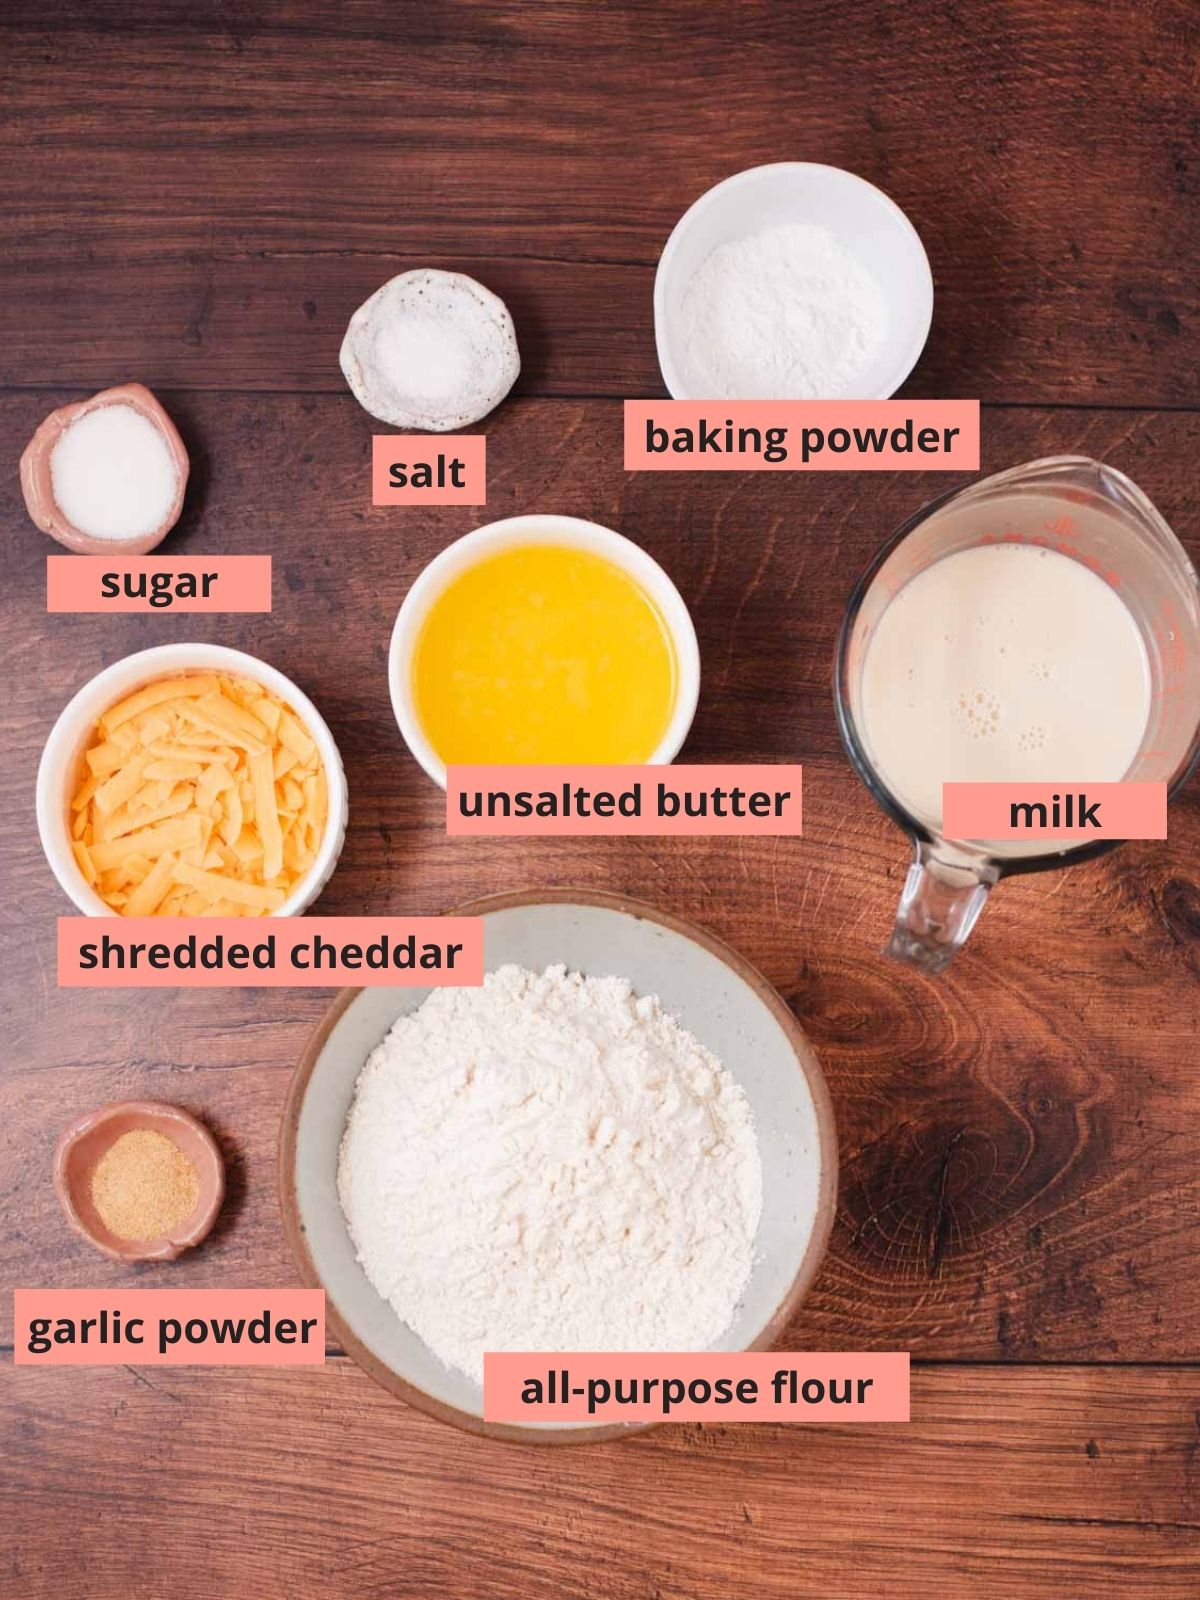 Labeled ingredients used to make cheddar drop biscuits